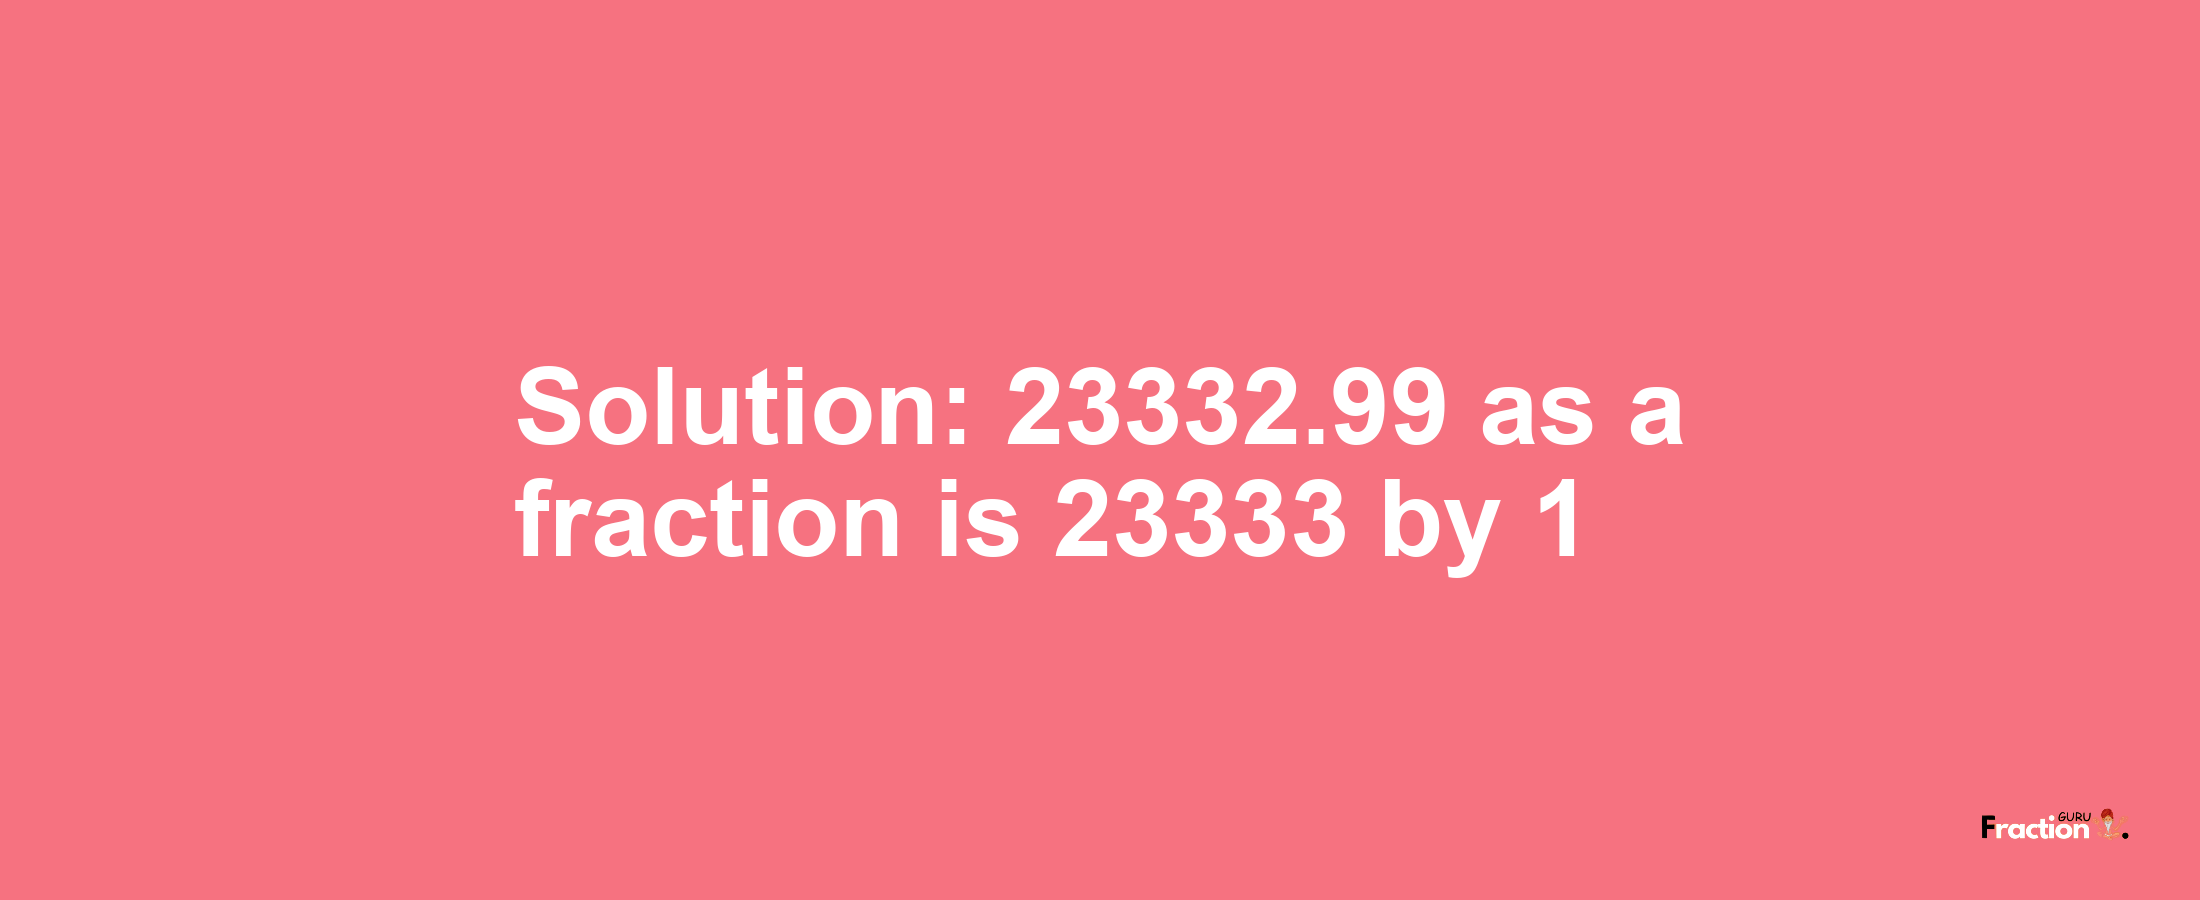 Solution:23332.99 as a fraction is 23333/1